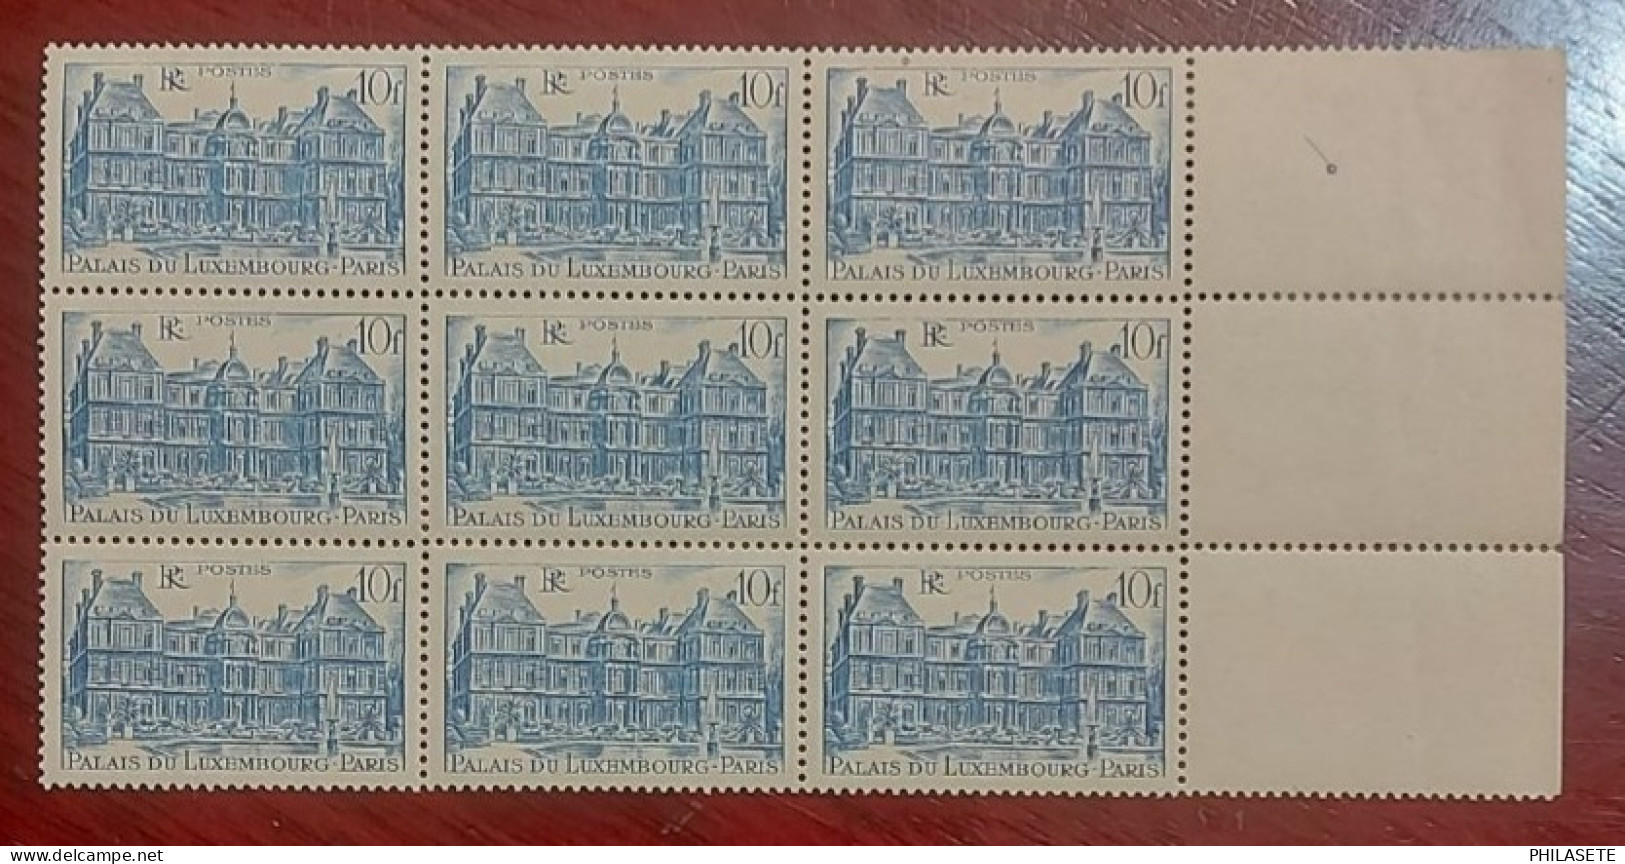 France Neuf** Bloc De 9 Timbres YT N° 760 Palais Du Luxembourg - Mint/Hinged